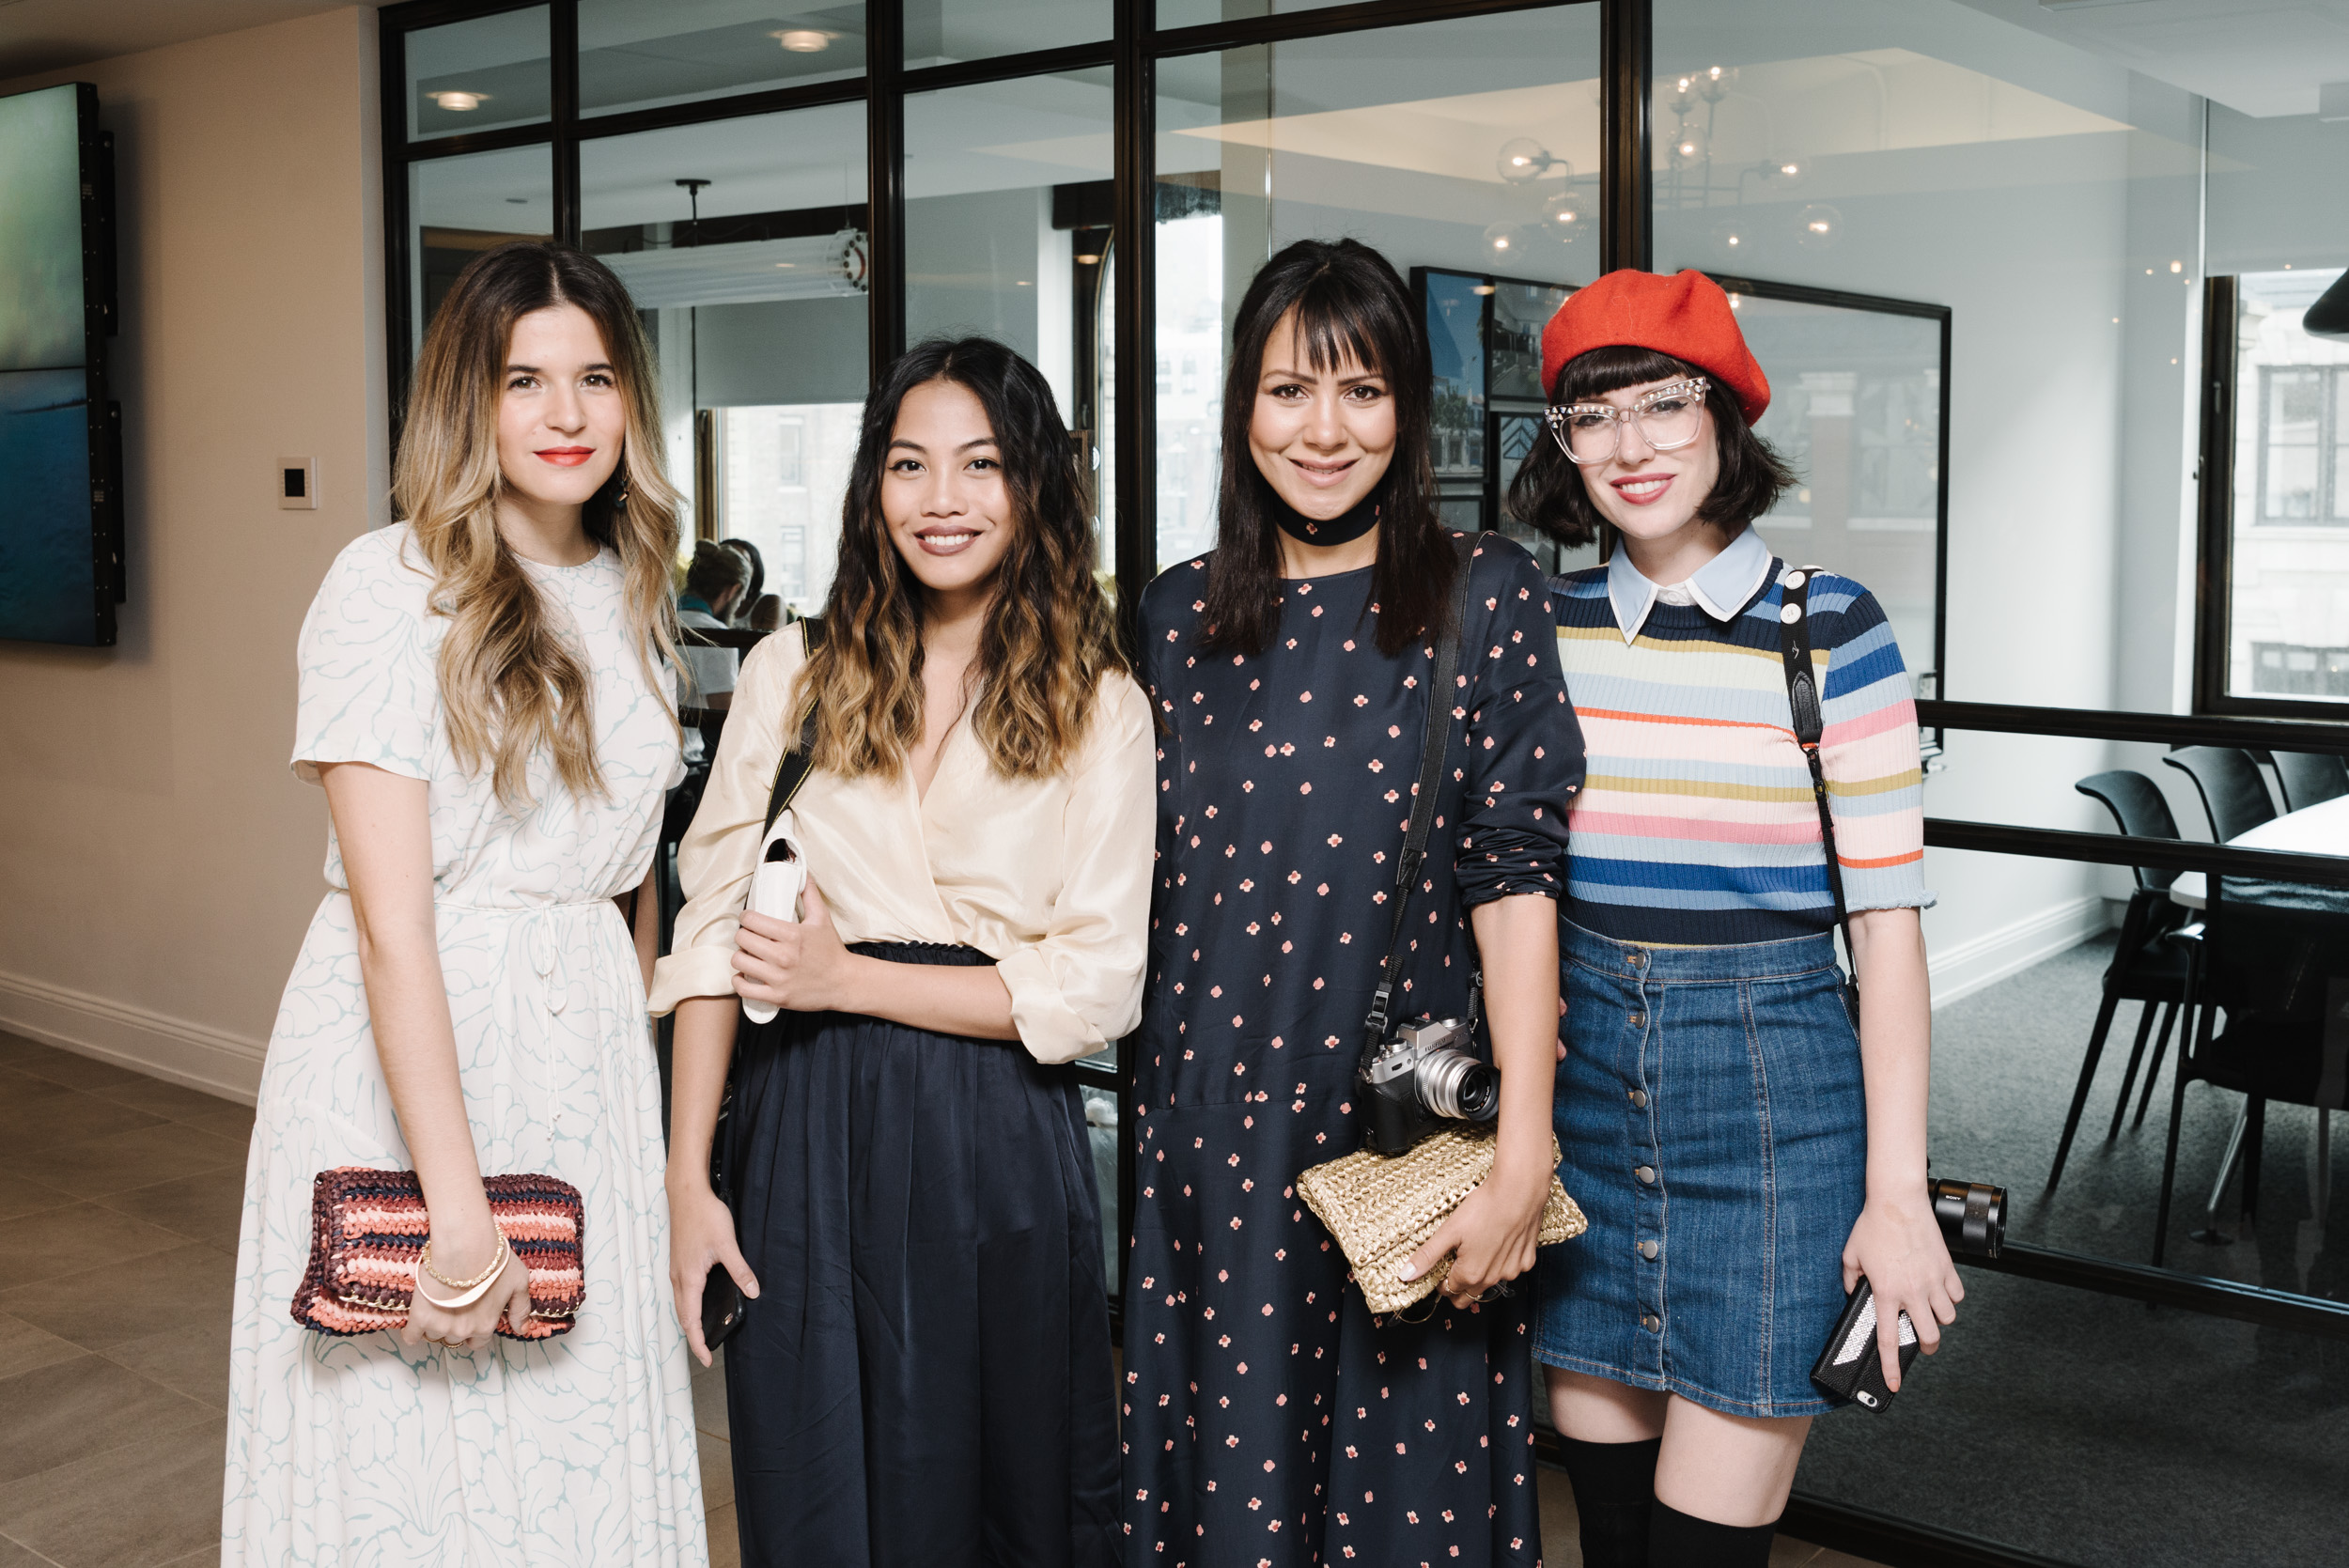 The 2016 nominees for Bloglovin Awards' Breakthrough Fashion Blogger of the Year: Maristella Gonzalez of A Constellation, Jannel Therese of Street Style Teller, Taye Hansberry of Stuff She Likes and Amy Roiland of A Fashion Nerd